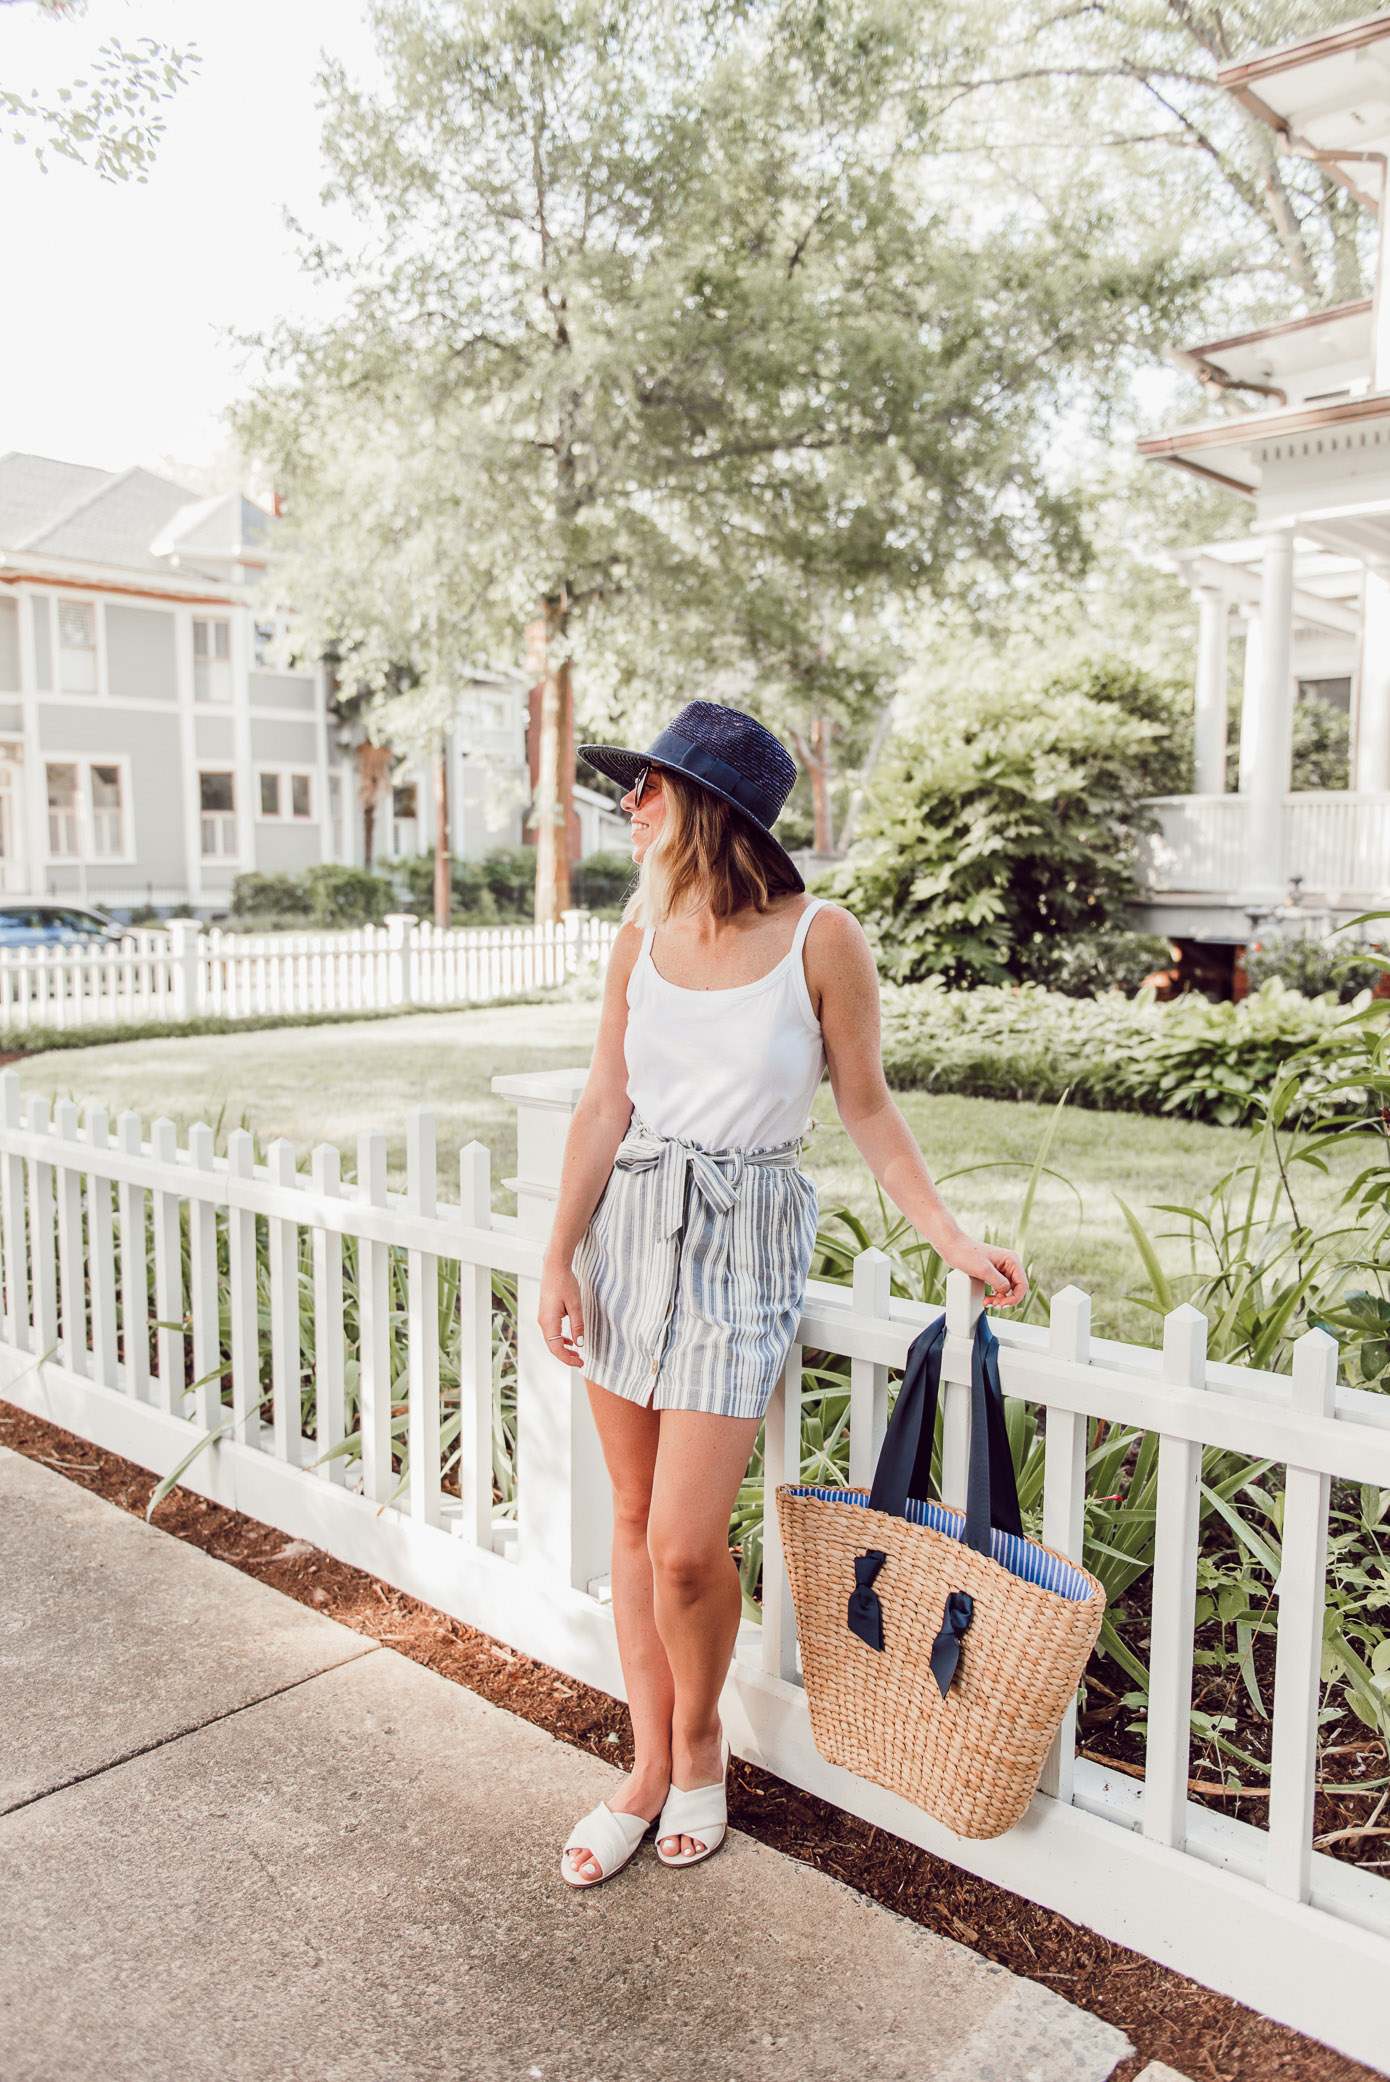 Savoring Summer | The Tank Every Woman Needs - Louella Reese